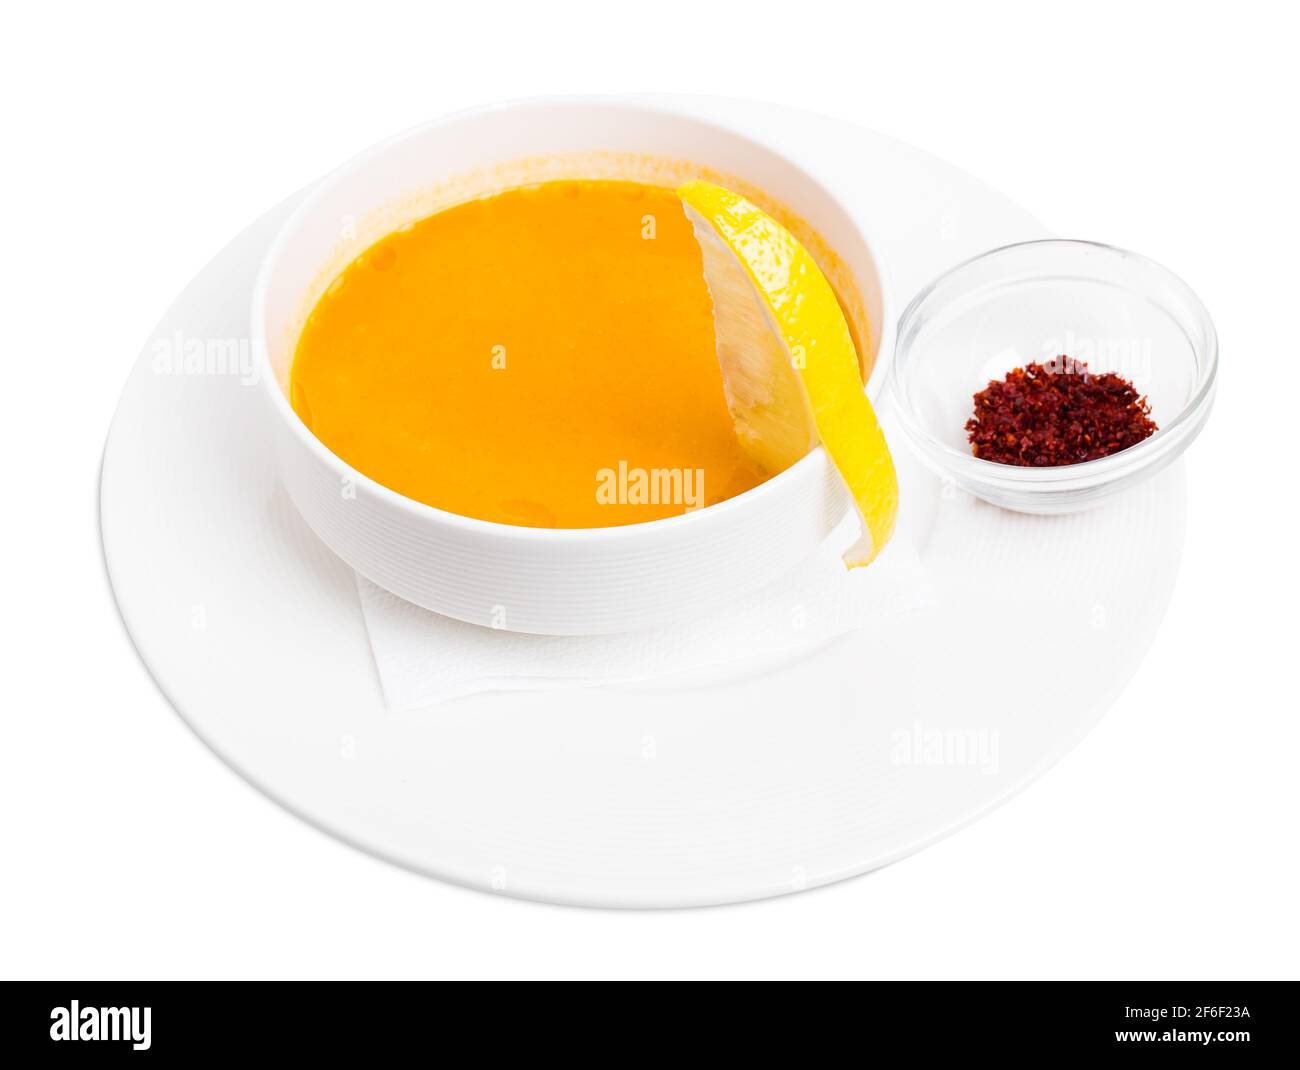 Lentil soup cream with lemon slice and dried minced paprika spice. Isolated on a white background. Stock Photo